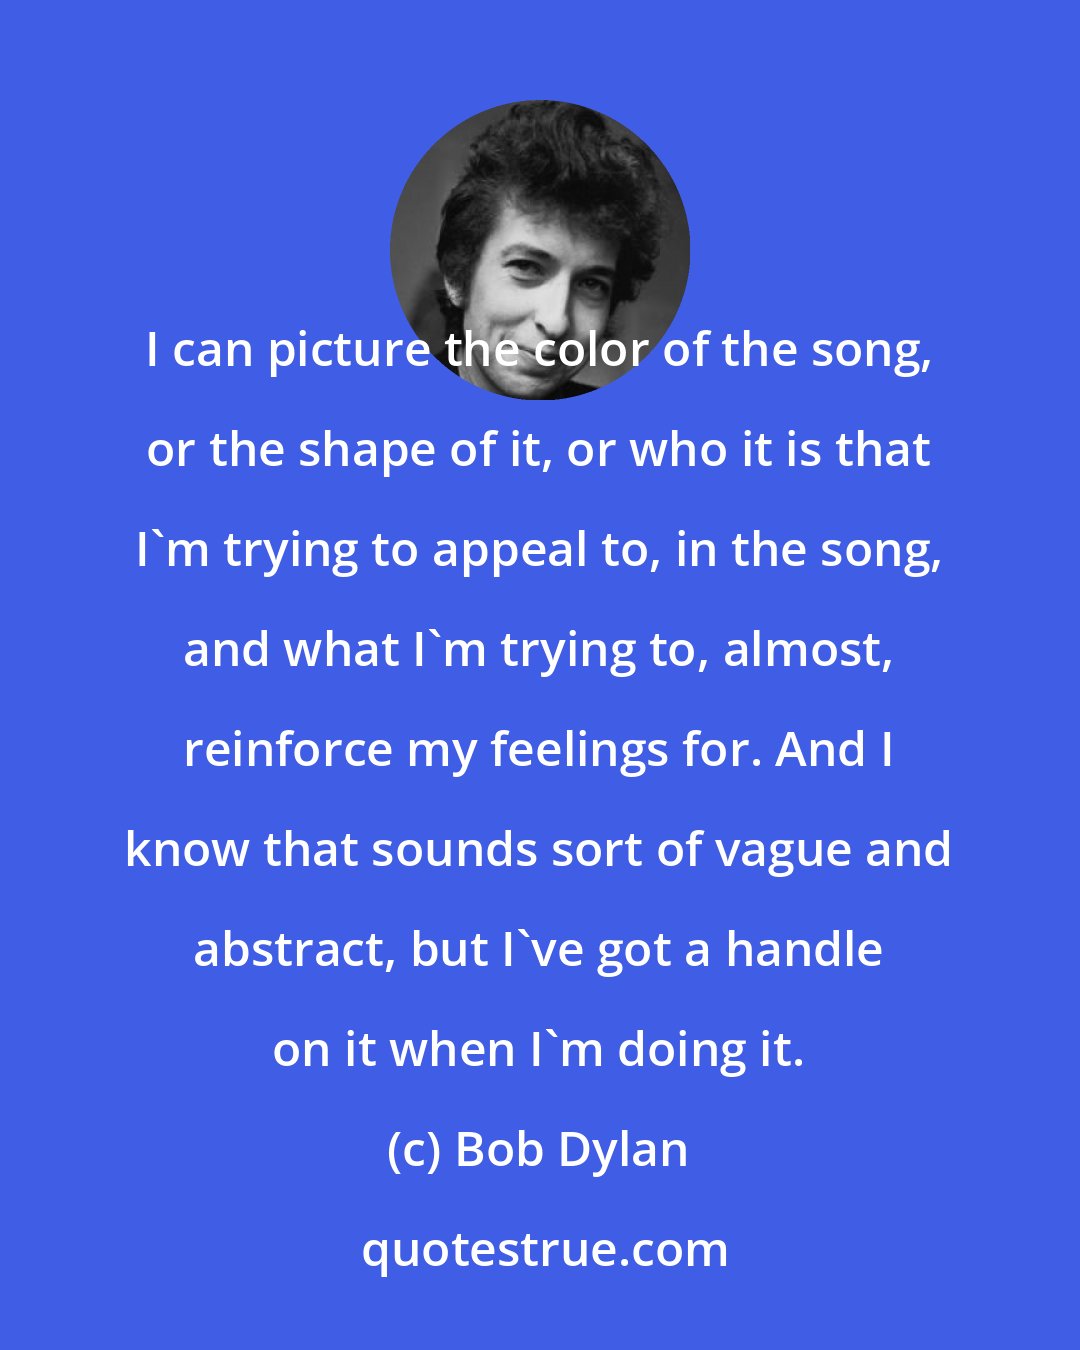 Bob Dylan: I can picture the color of the song, or the shape of it, or who it is that I'm trying to appeal to, in the song, and what I'm trying to, almost, reinforce my feelings for. And I know that sounds sort of vague and abstract, but I've got a handle on it when I'm doing it.